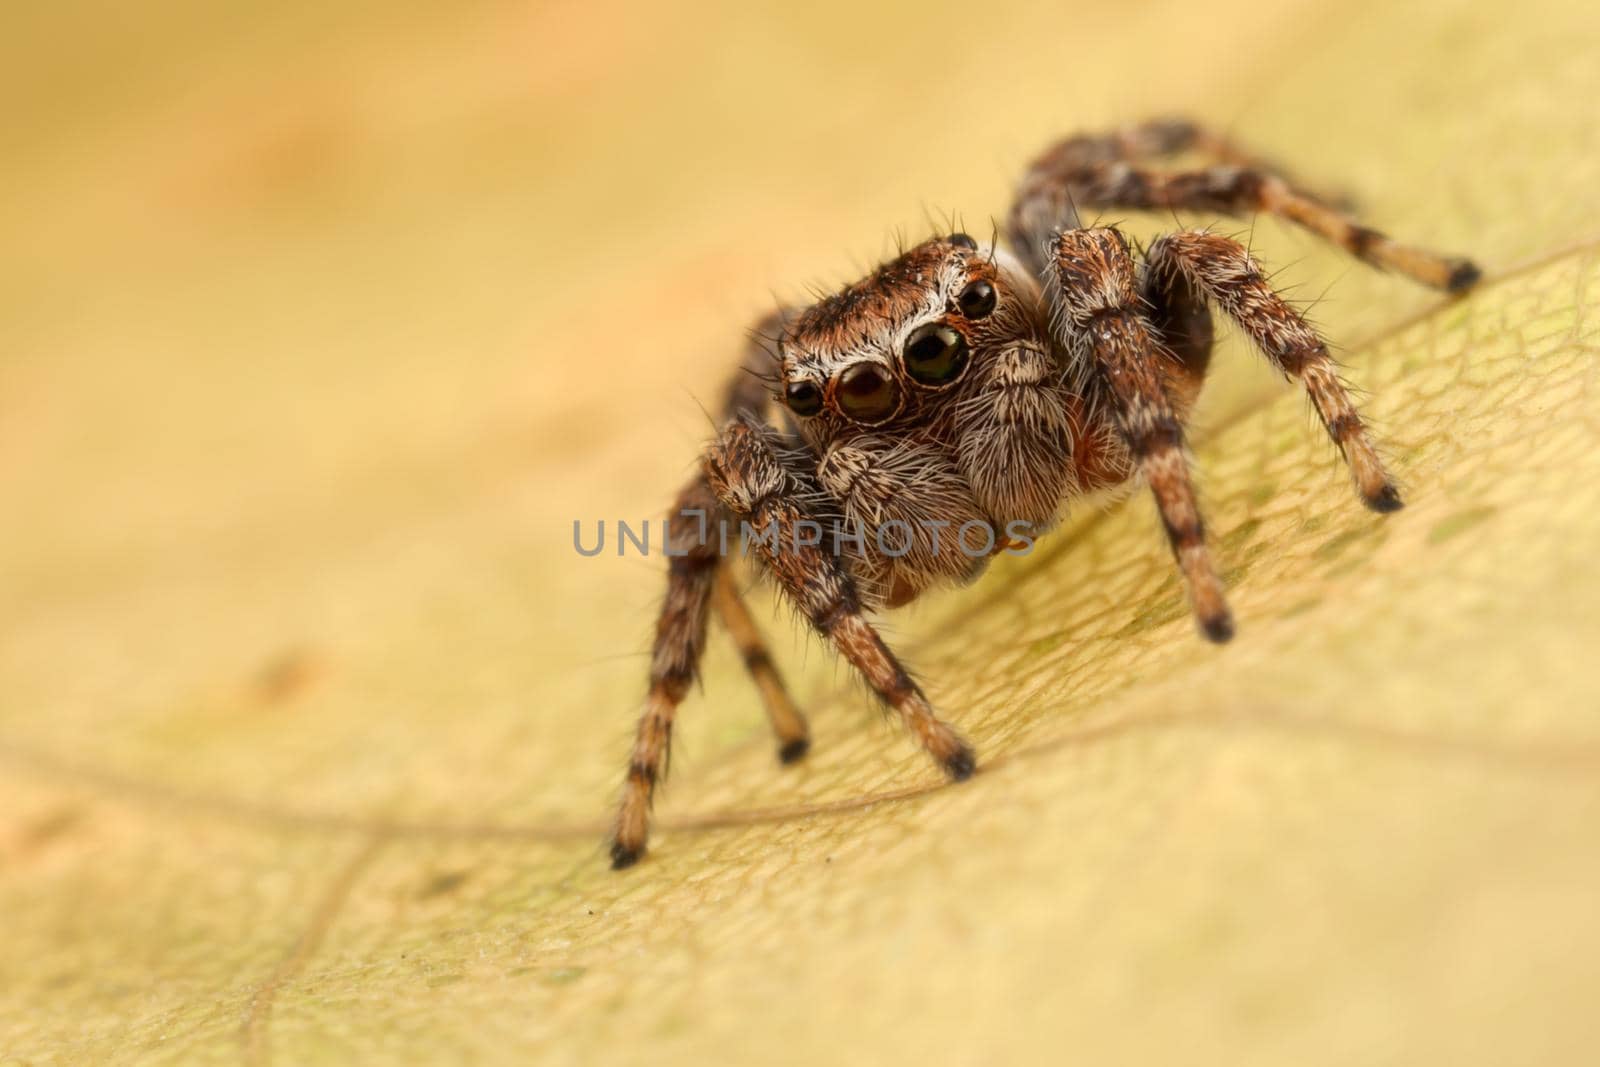 Jumping spider portrait on the yellow autumn leaf